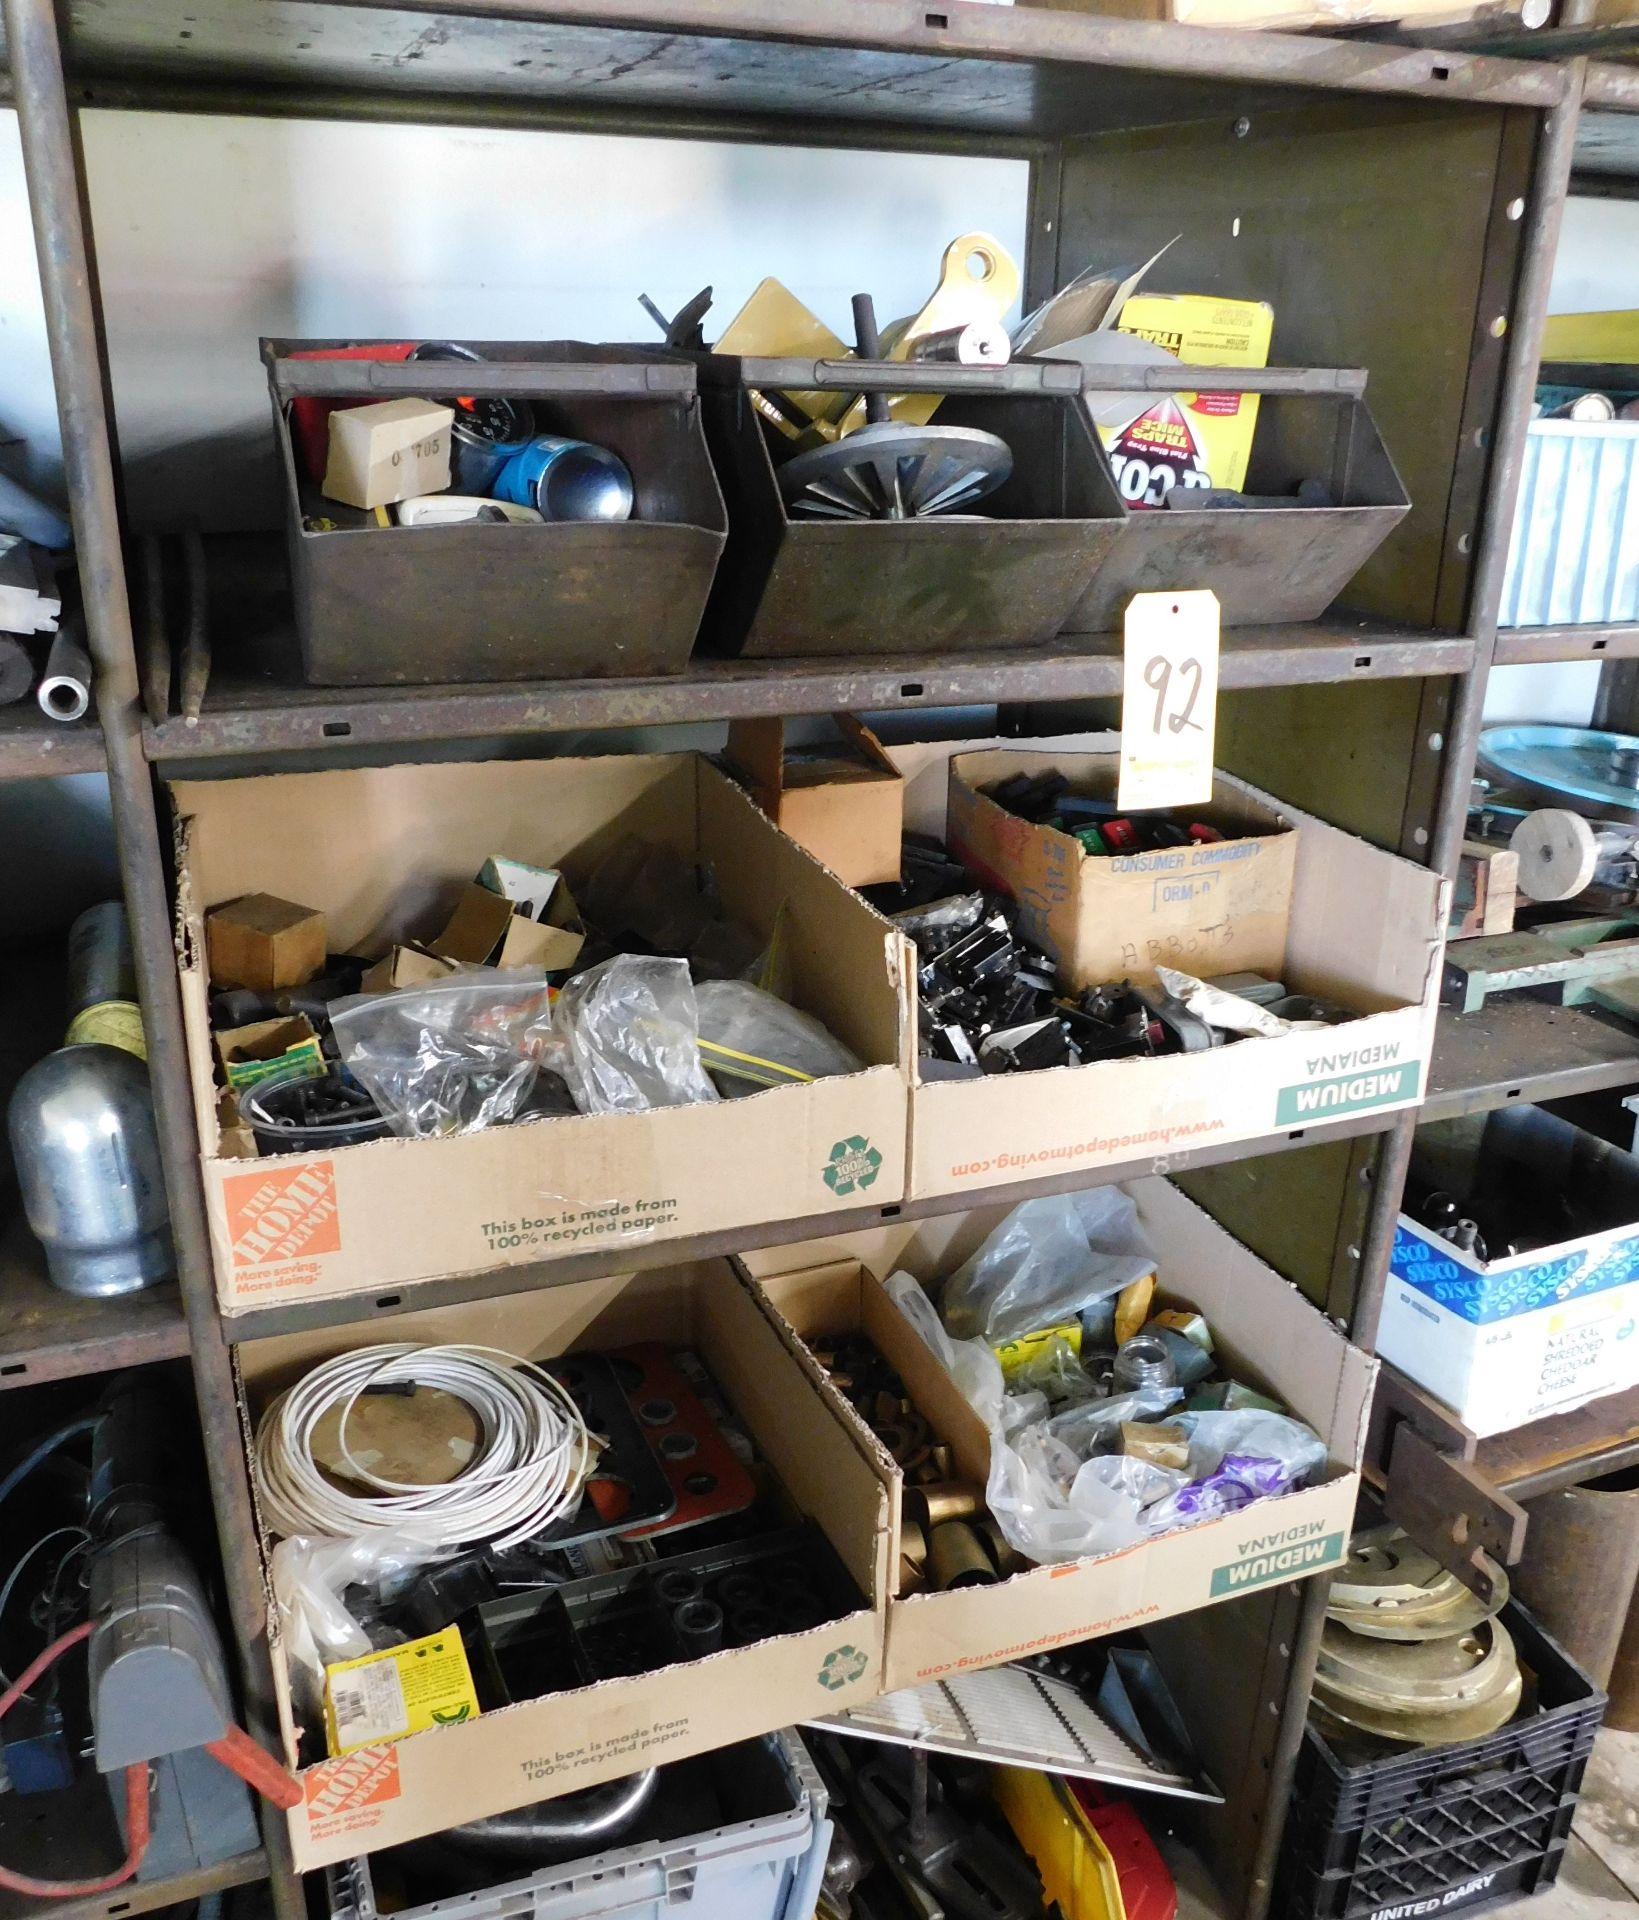 Contents of (1) Section of Metal Shelving